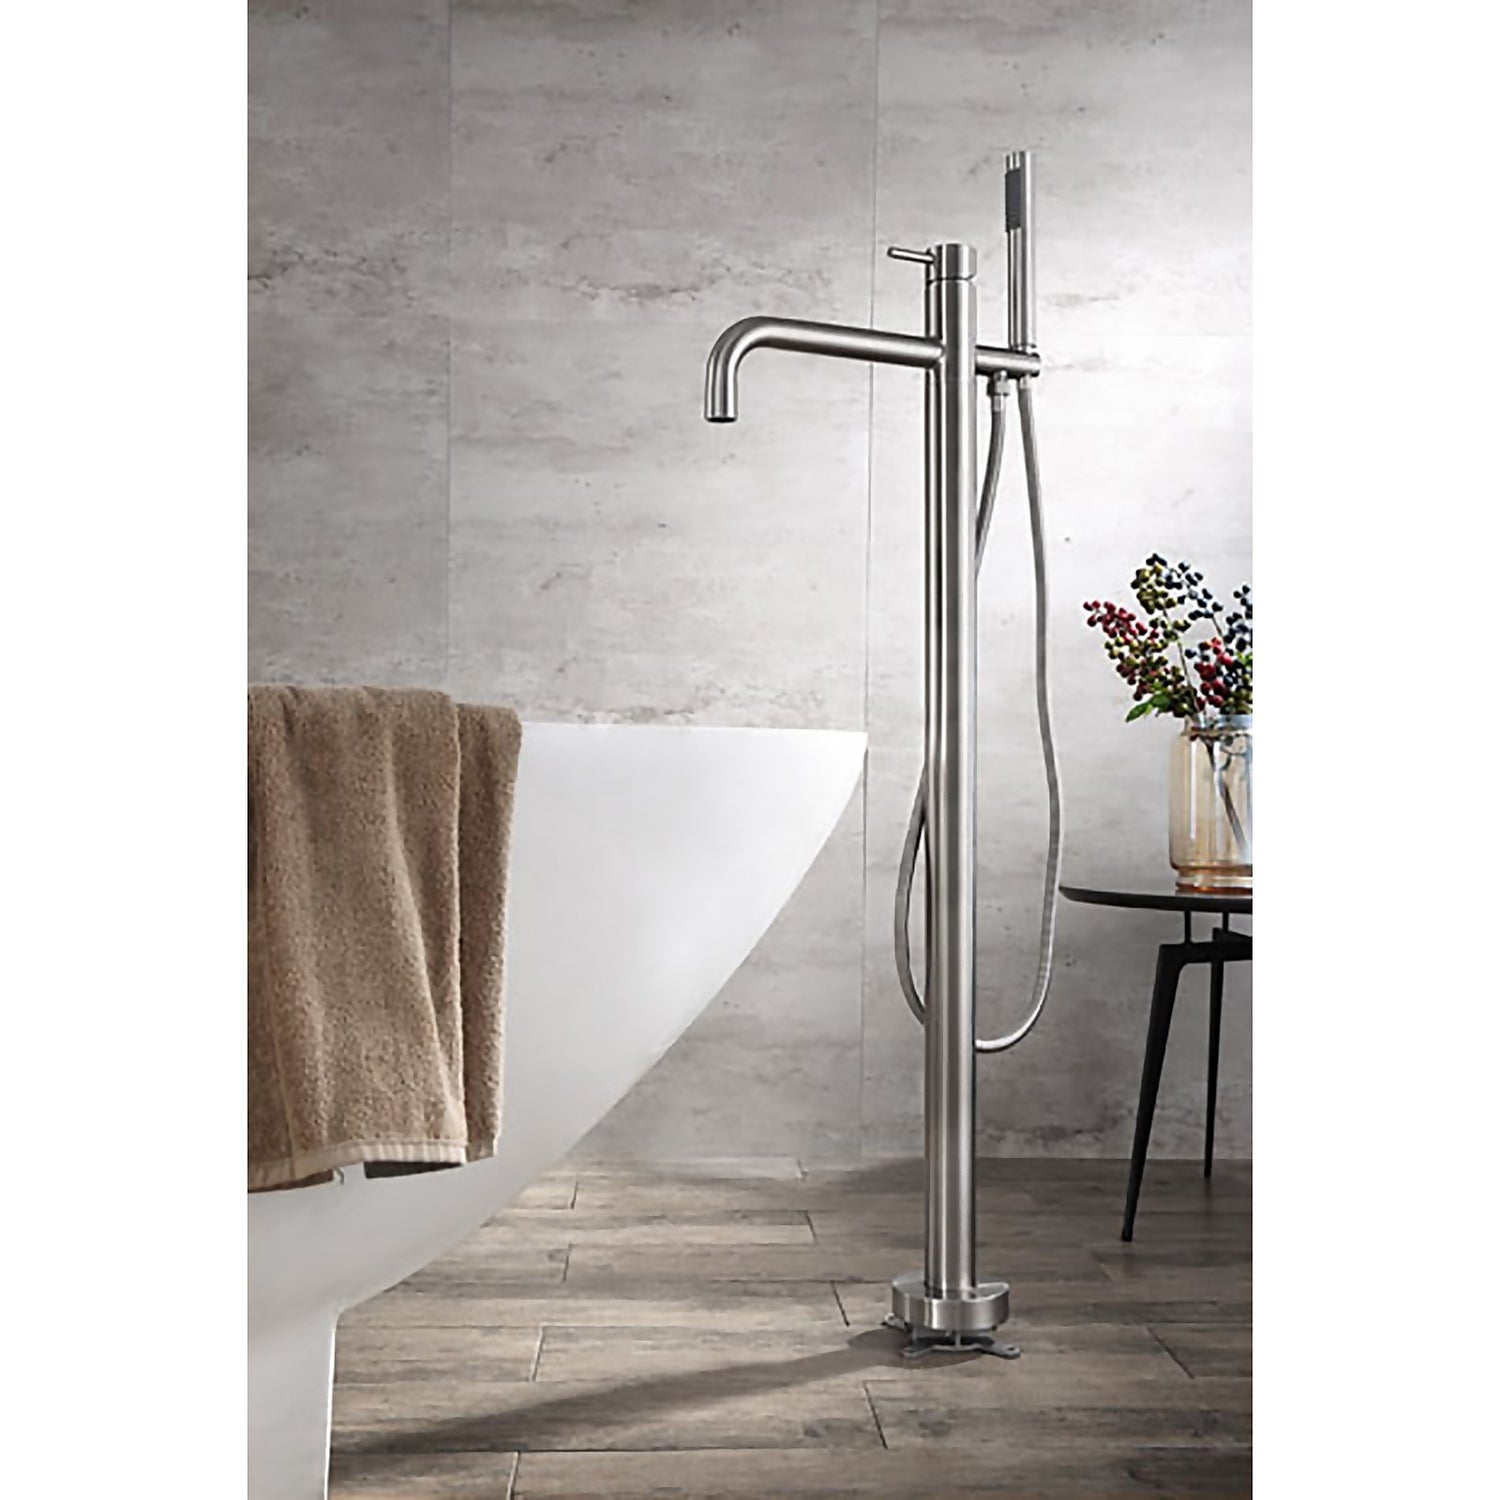 Forge Stainless Steel Floorstanding Shower Mixer Tap